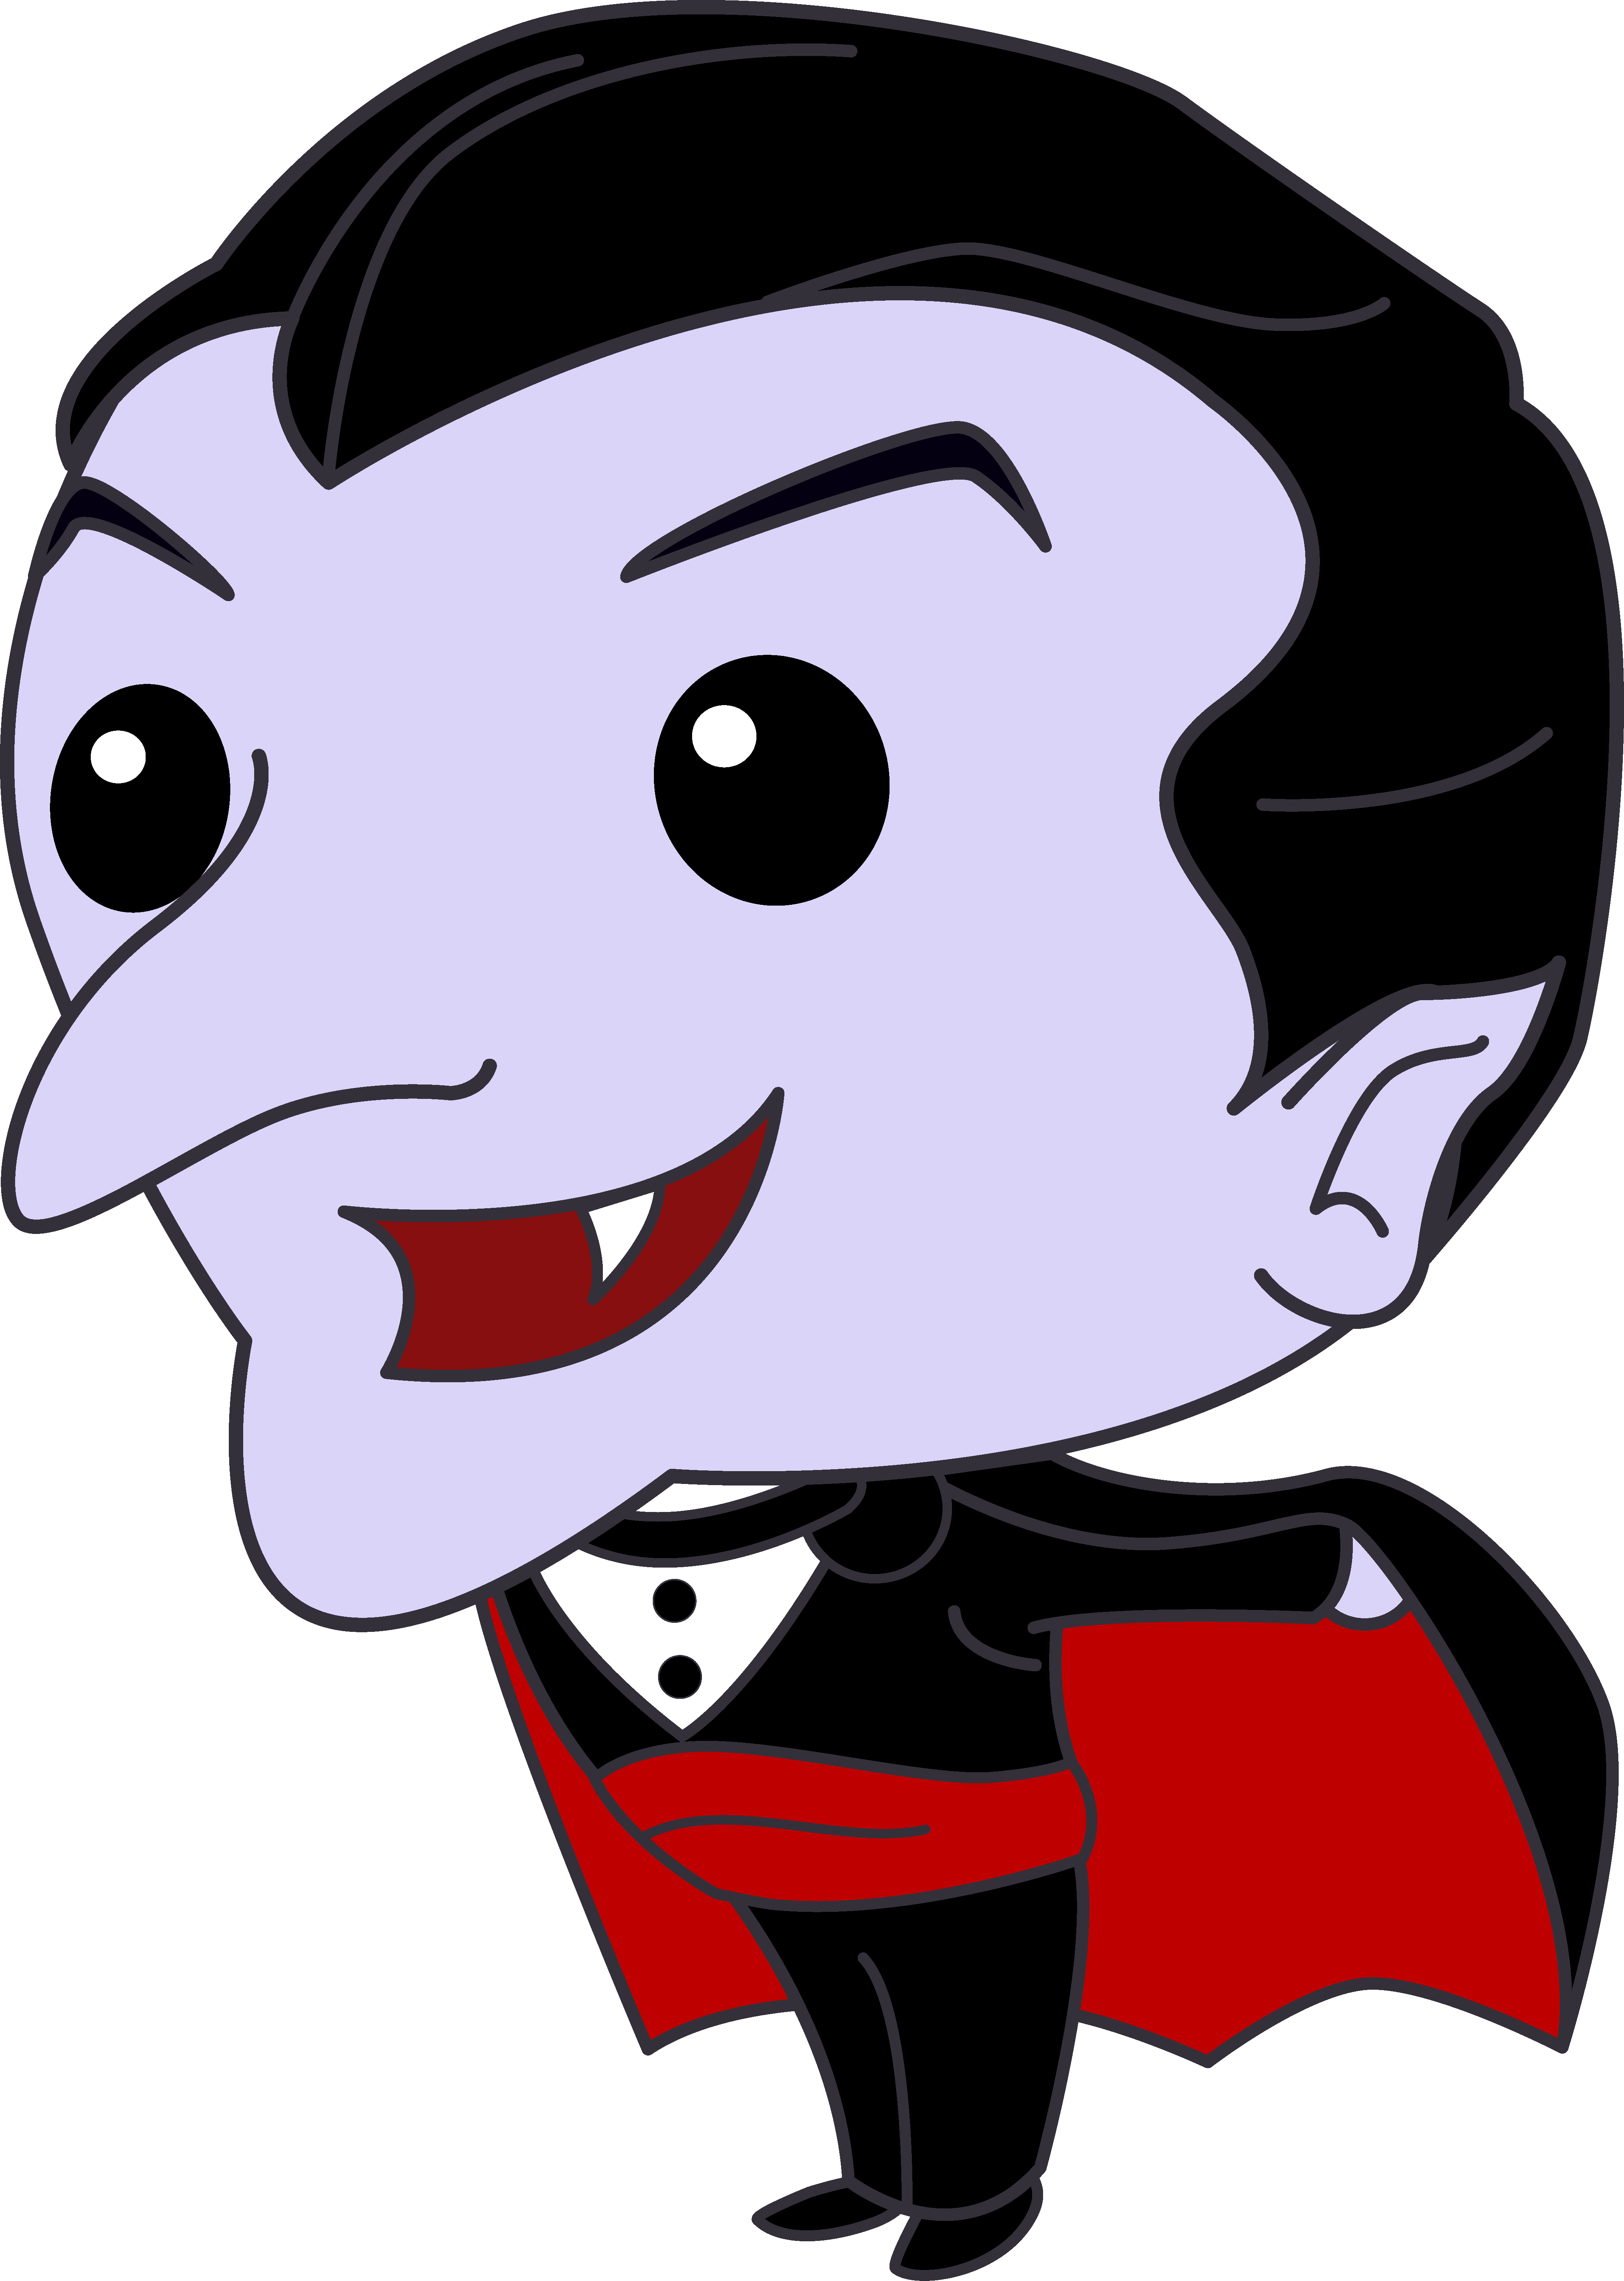 Free Cartoon Vampire Download Free Clip Art Free Clip Art On Clipart Library